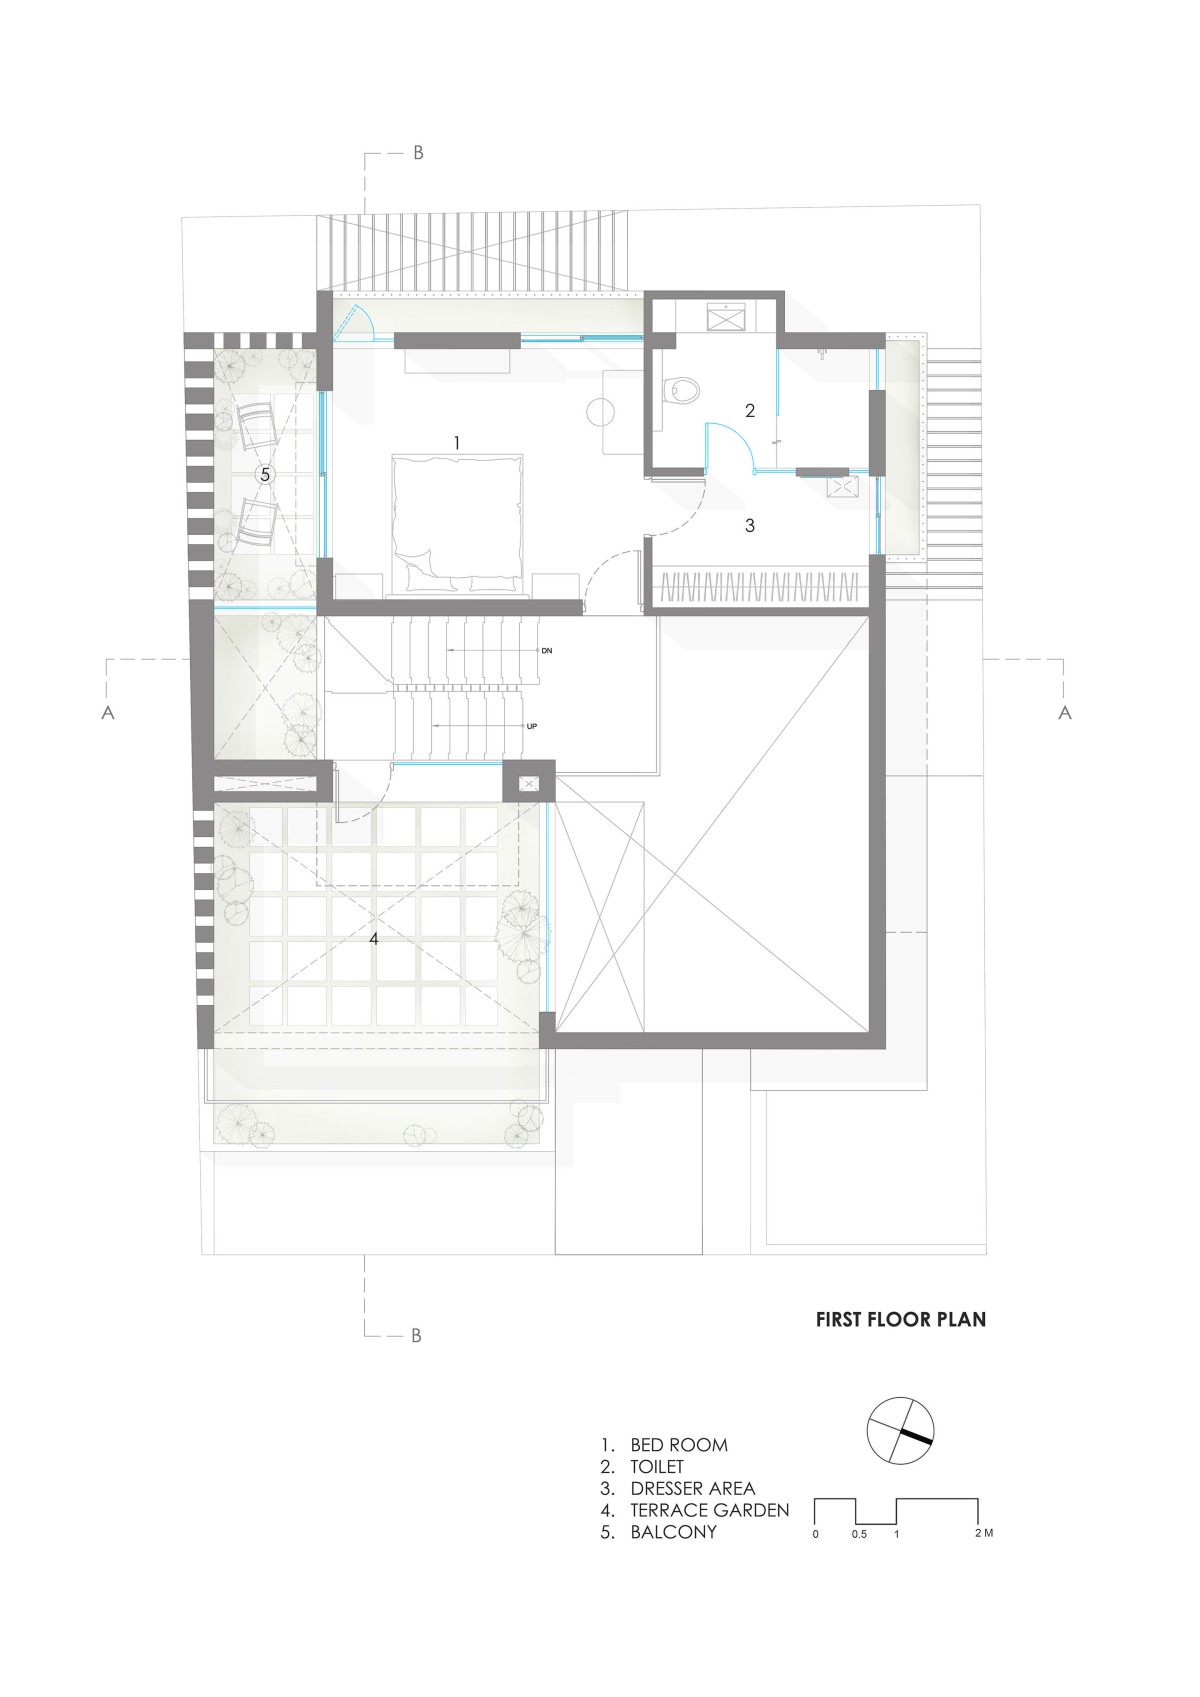 First floor plan of The White Bleached House by Neogenesis+Studi0261